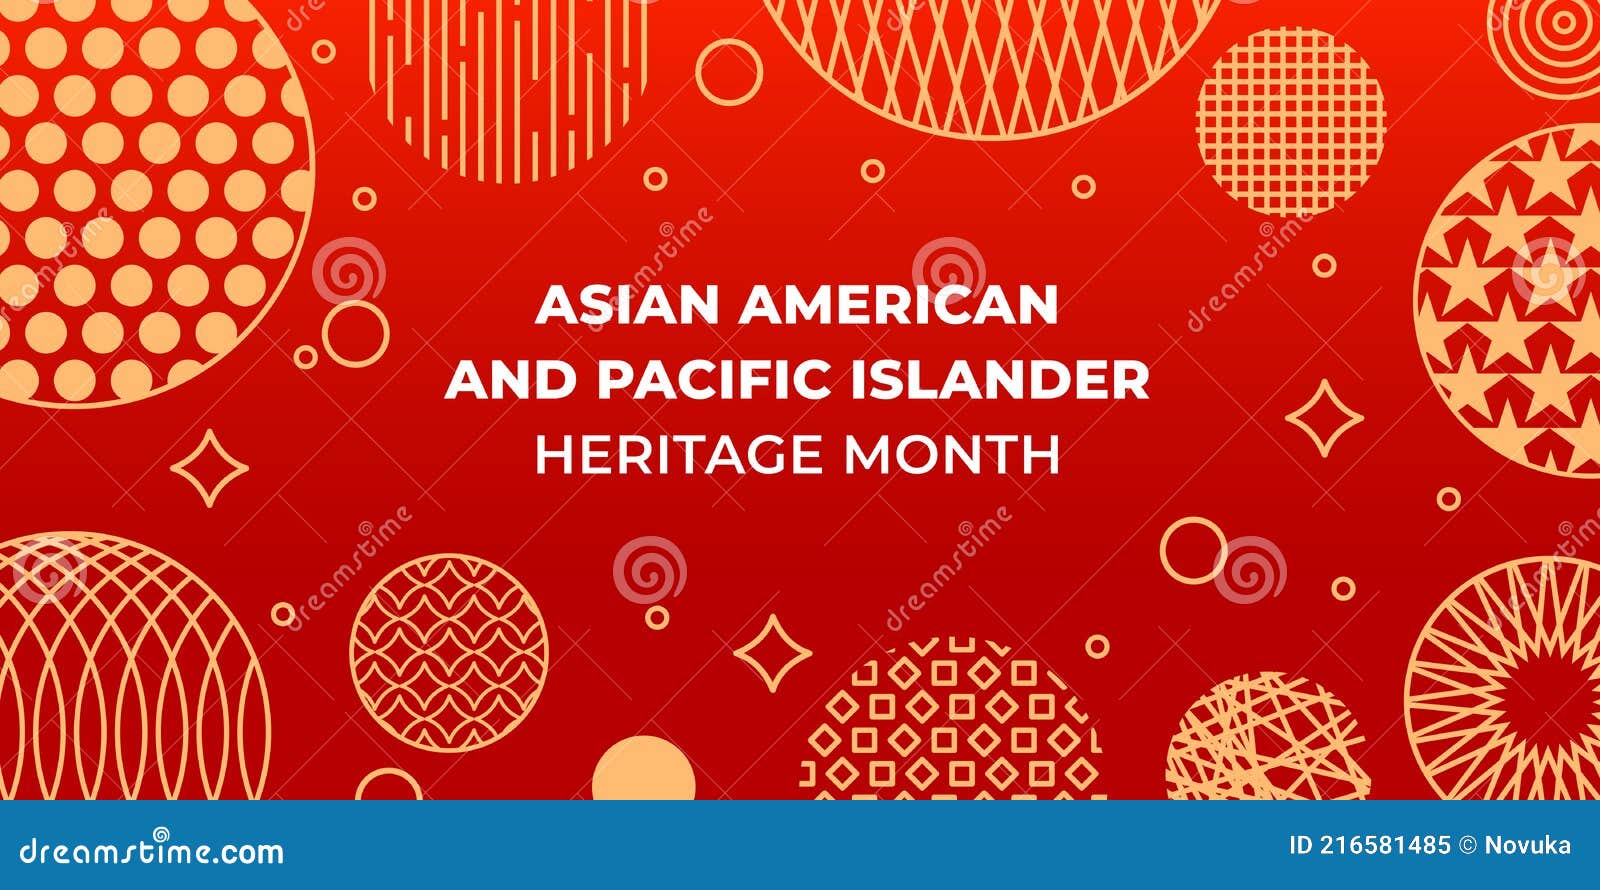 asian american and pacific islander heritage month.  banner for social media, card, poster.  with text, chinese